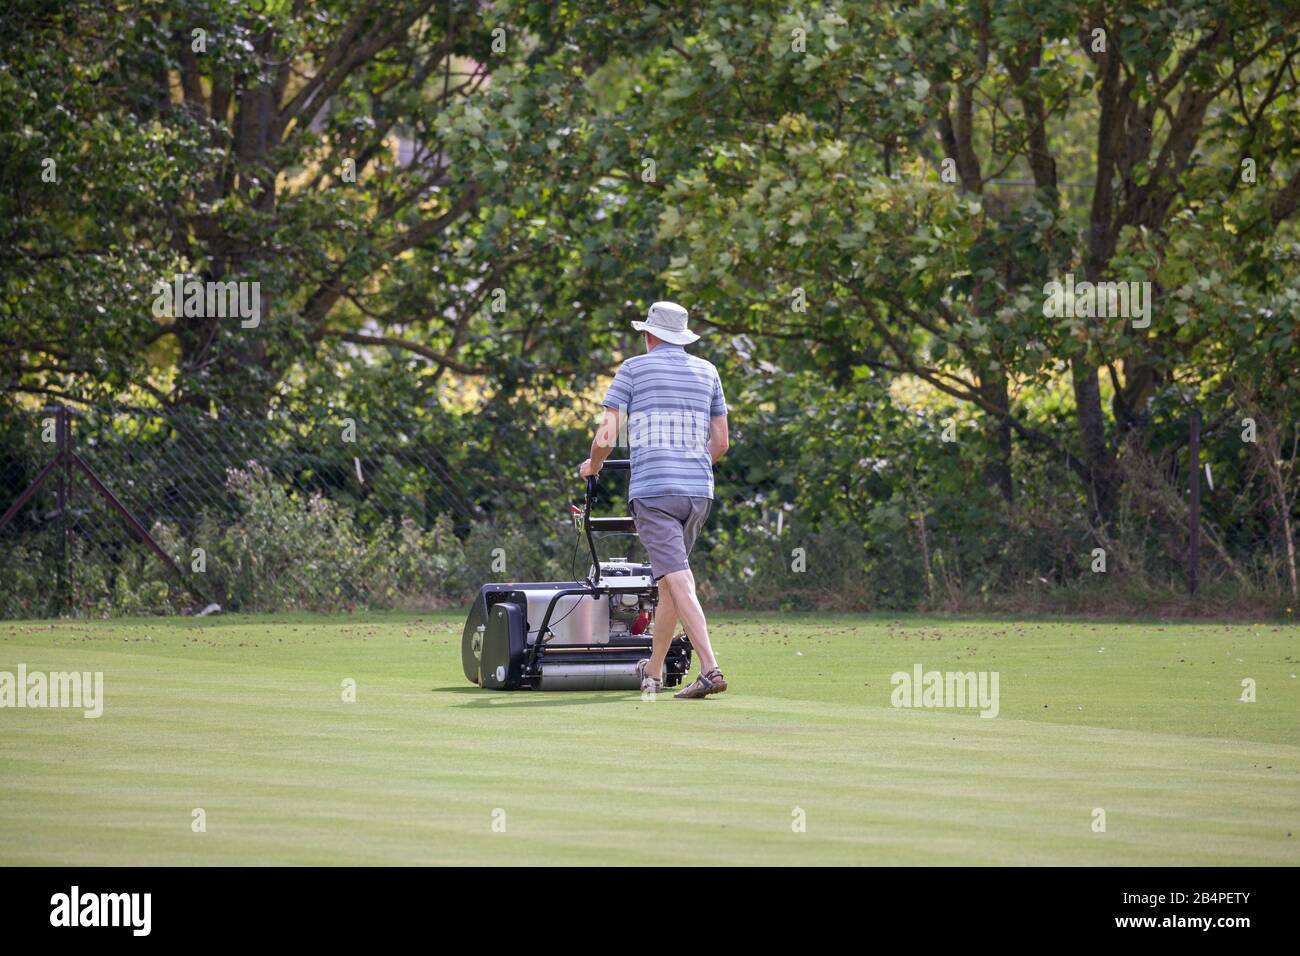 Man mowing the lawn at a bowling green Stock Photo